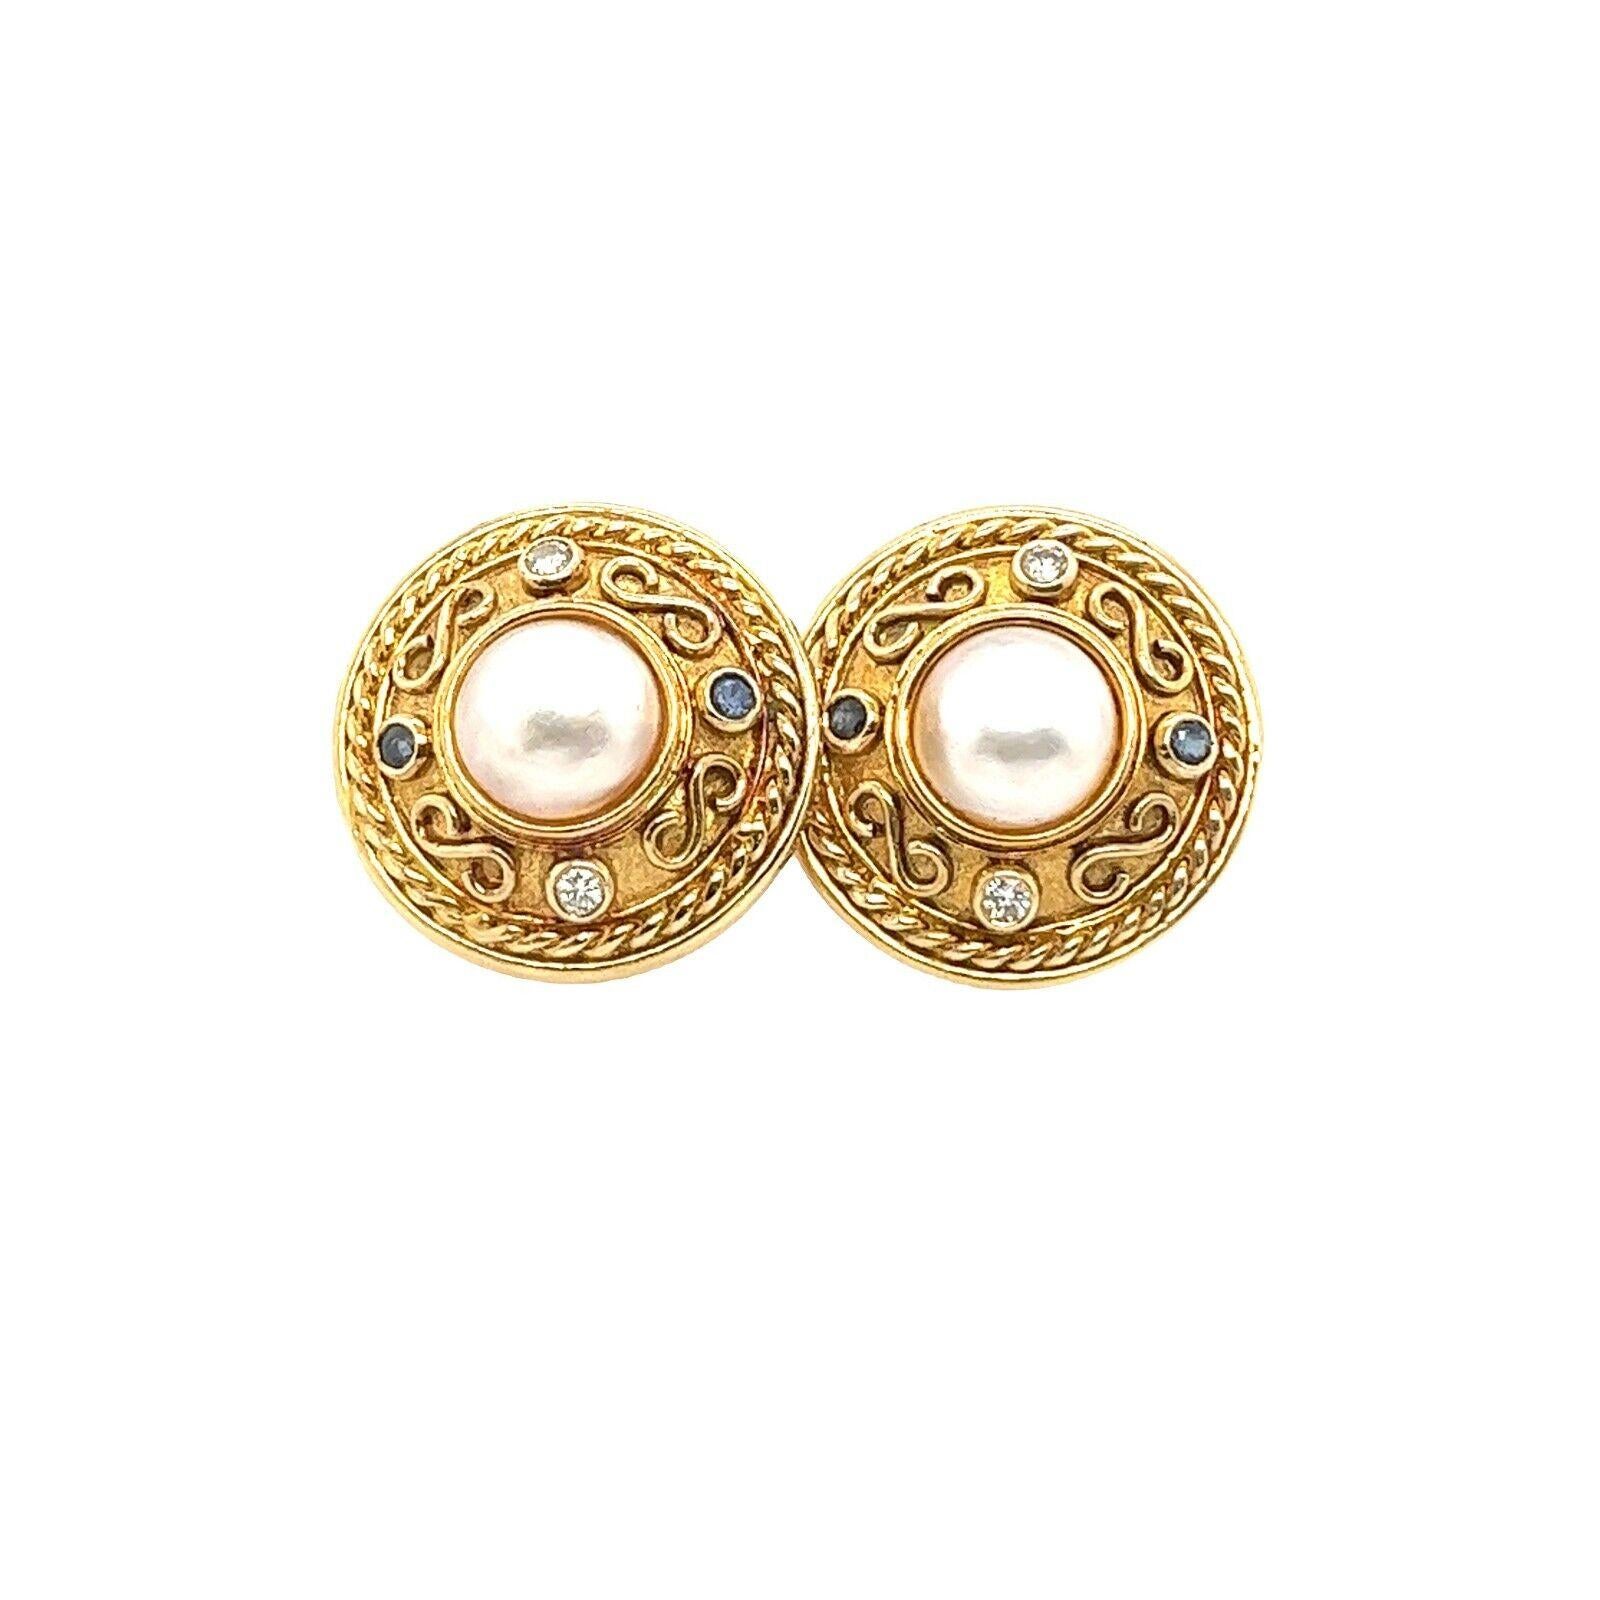 This pair of Etruscan style earrings features 2 round brilliant cut Diamonds & 2 Sapphire set in 9ct Yellow Gold in a round shape. It's perfect for every day and can be worn with any outfit.

Additional Information:
Total Diamond Weight: